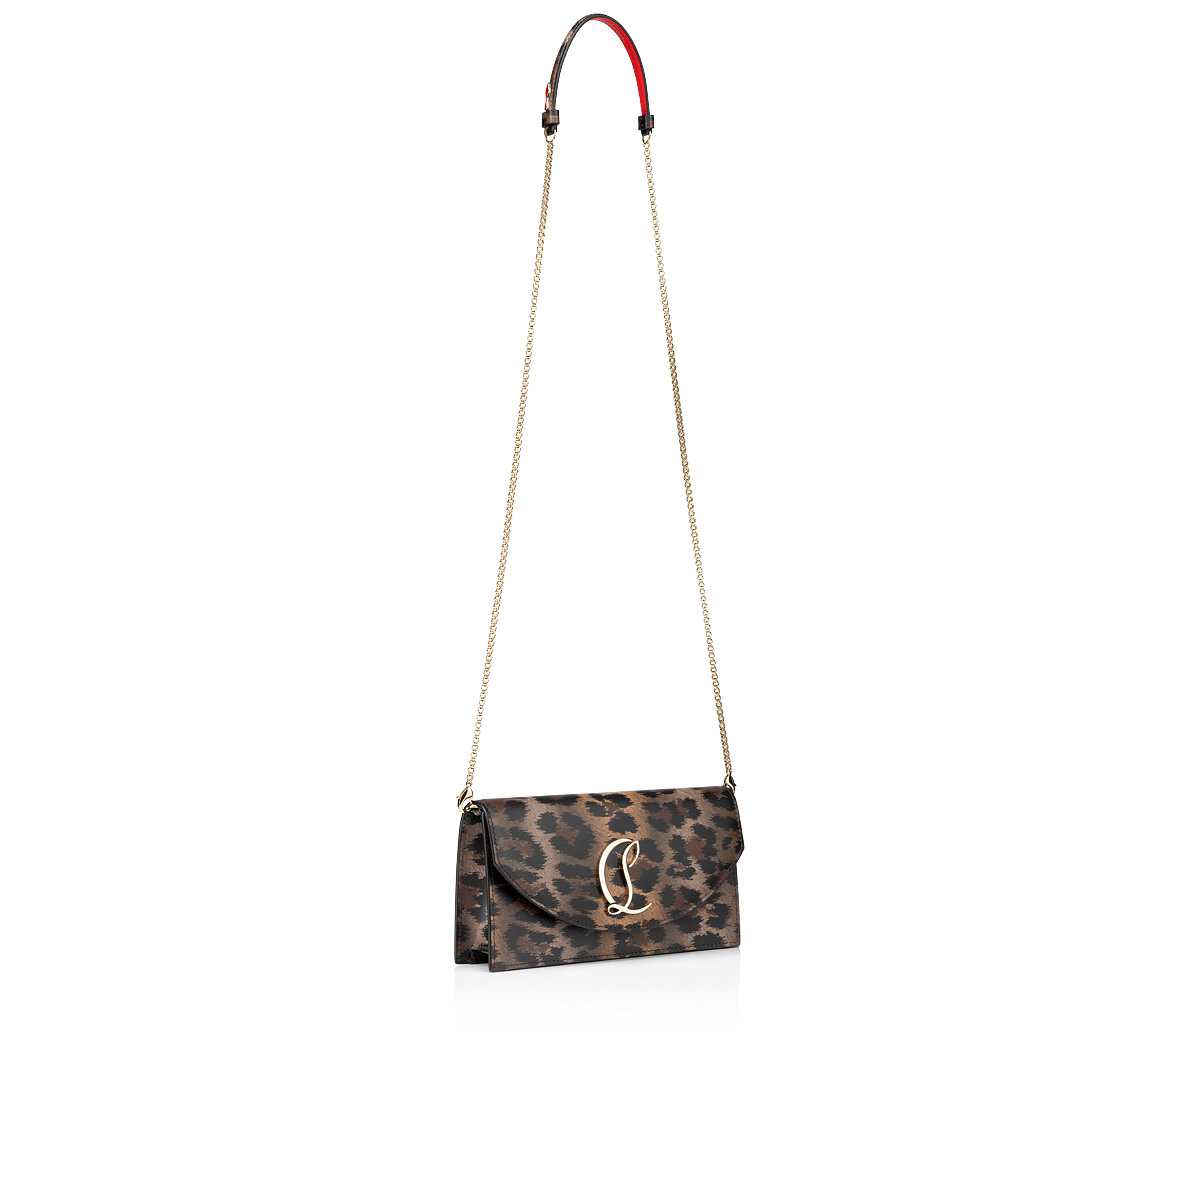 Christian Louboutin Leopard Print Leather Pouch in 3221 Brown/Gold